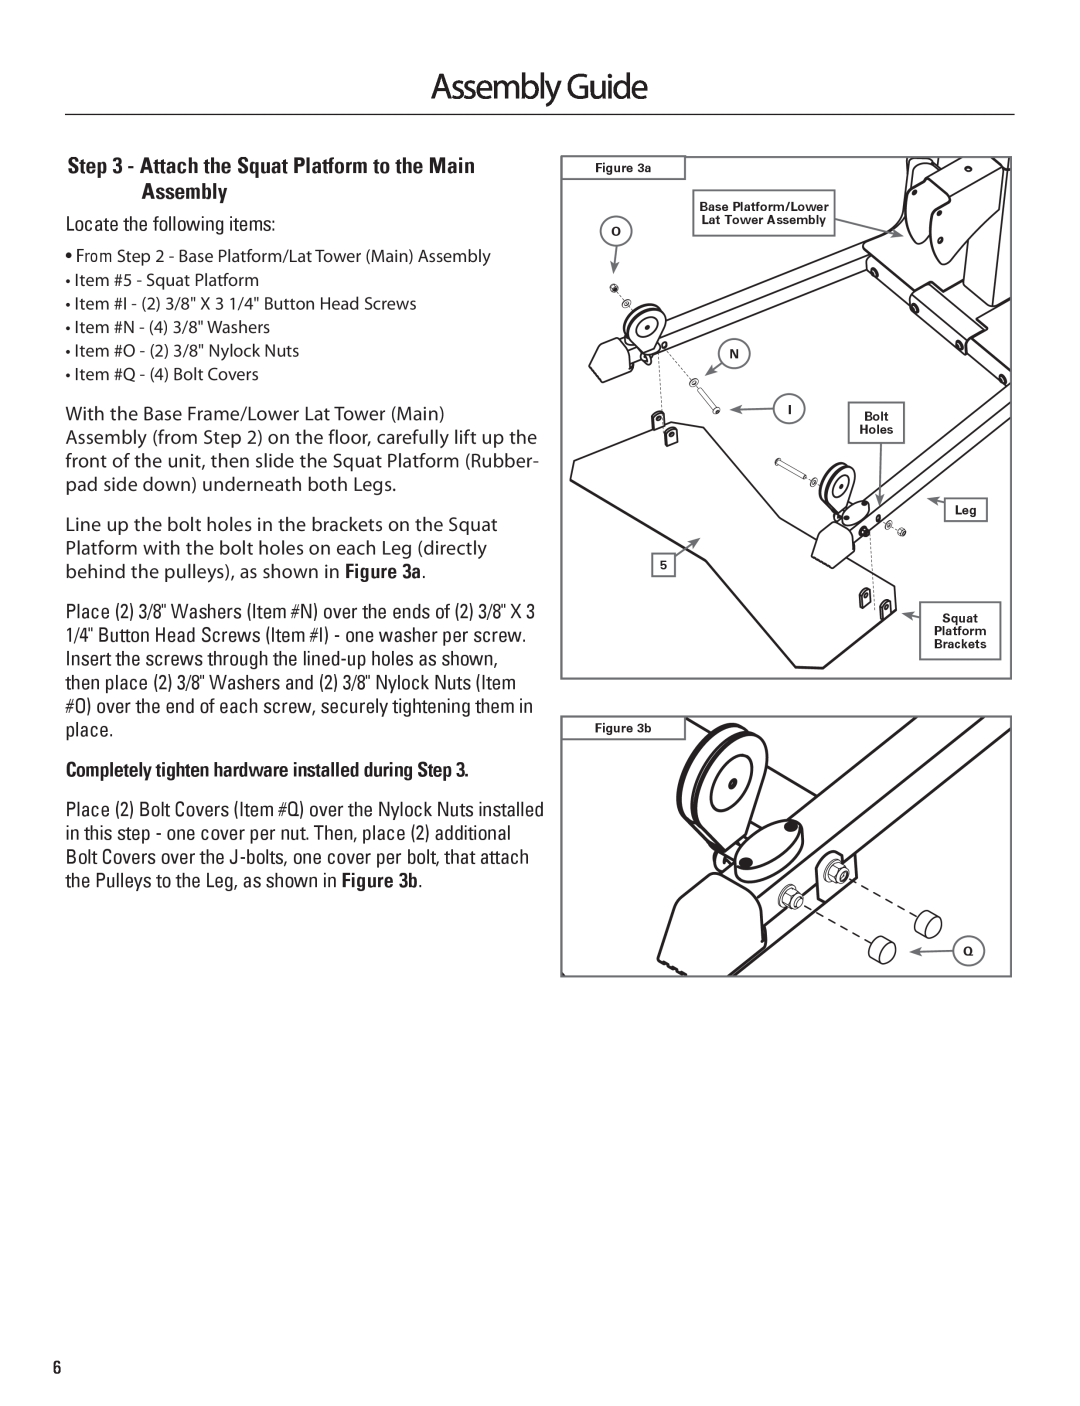 Bowflex 001-6961 manual Attach the Squat Platform to the Main Assembly, Assembly Guide 